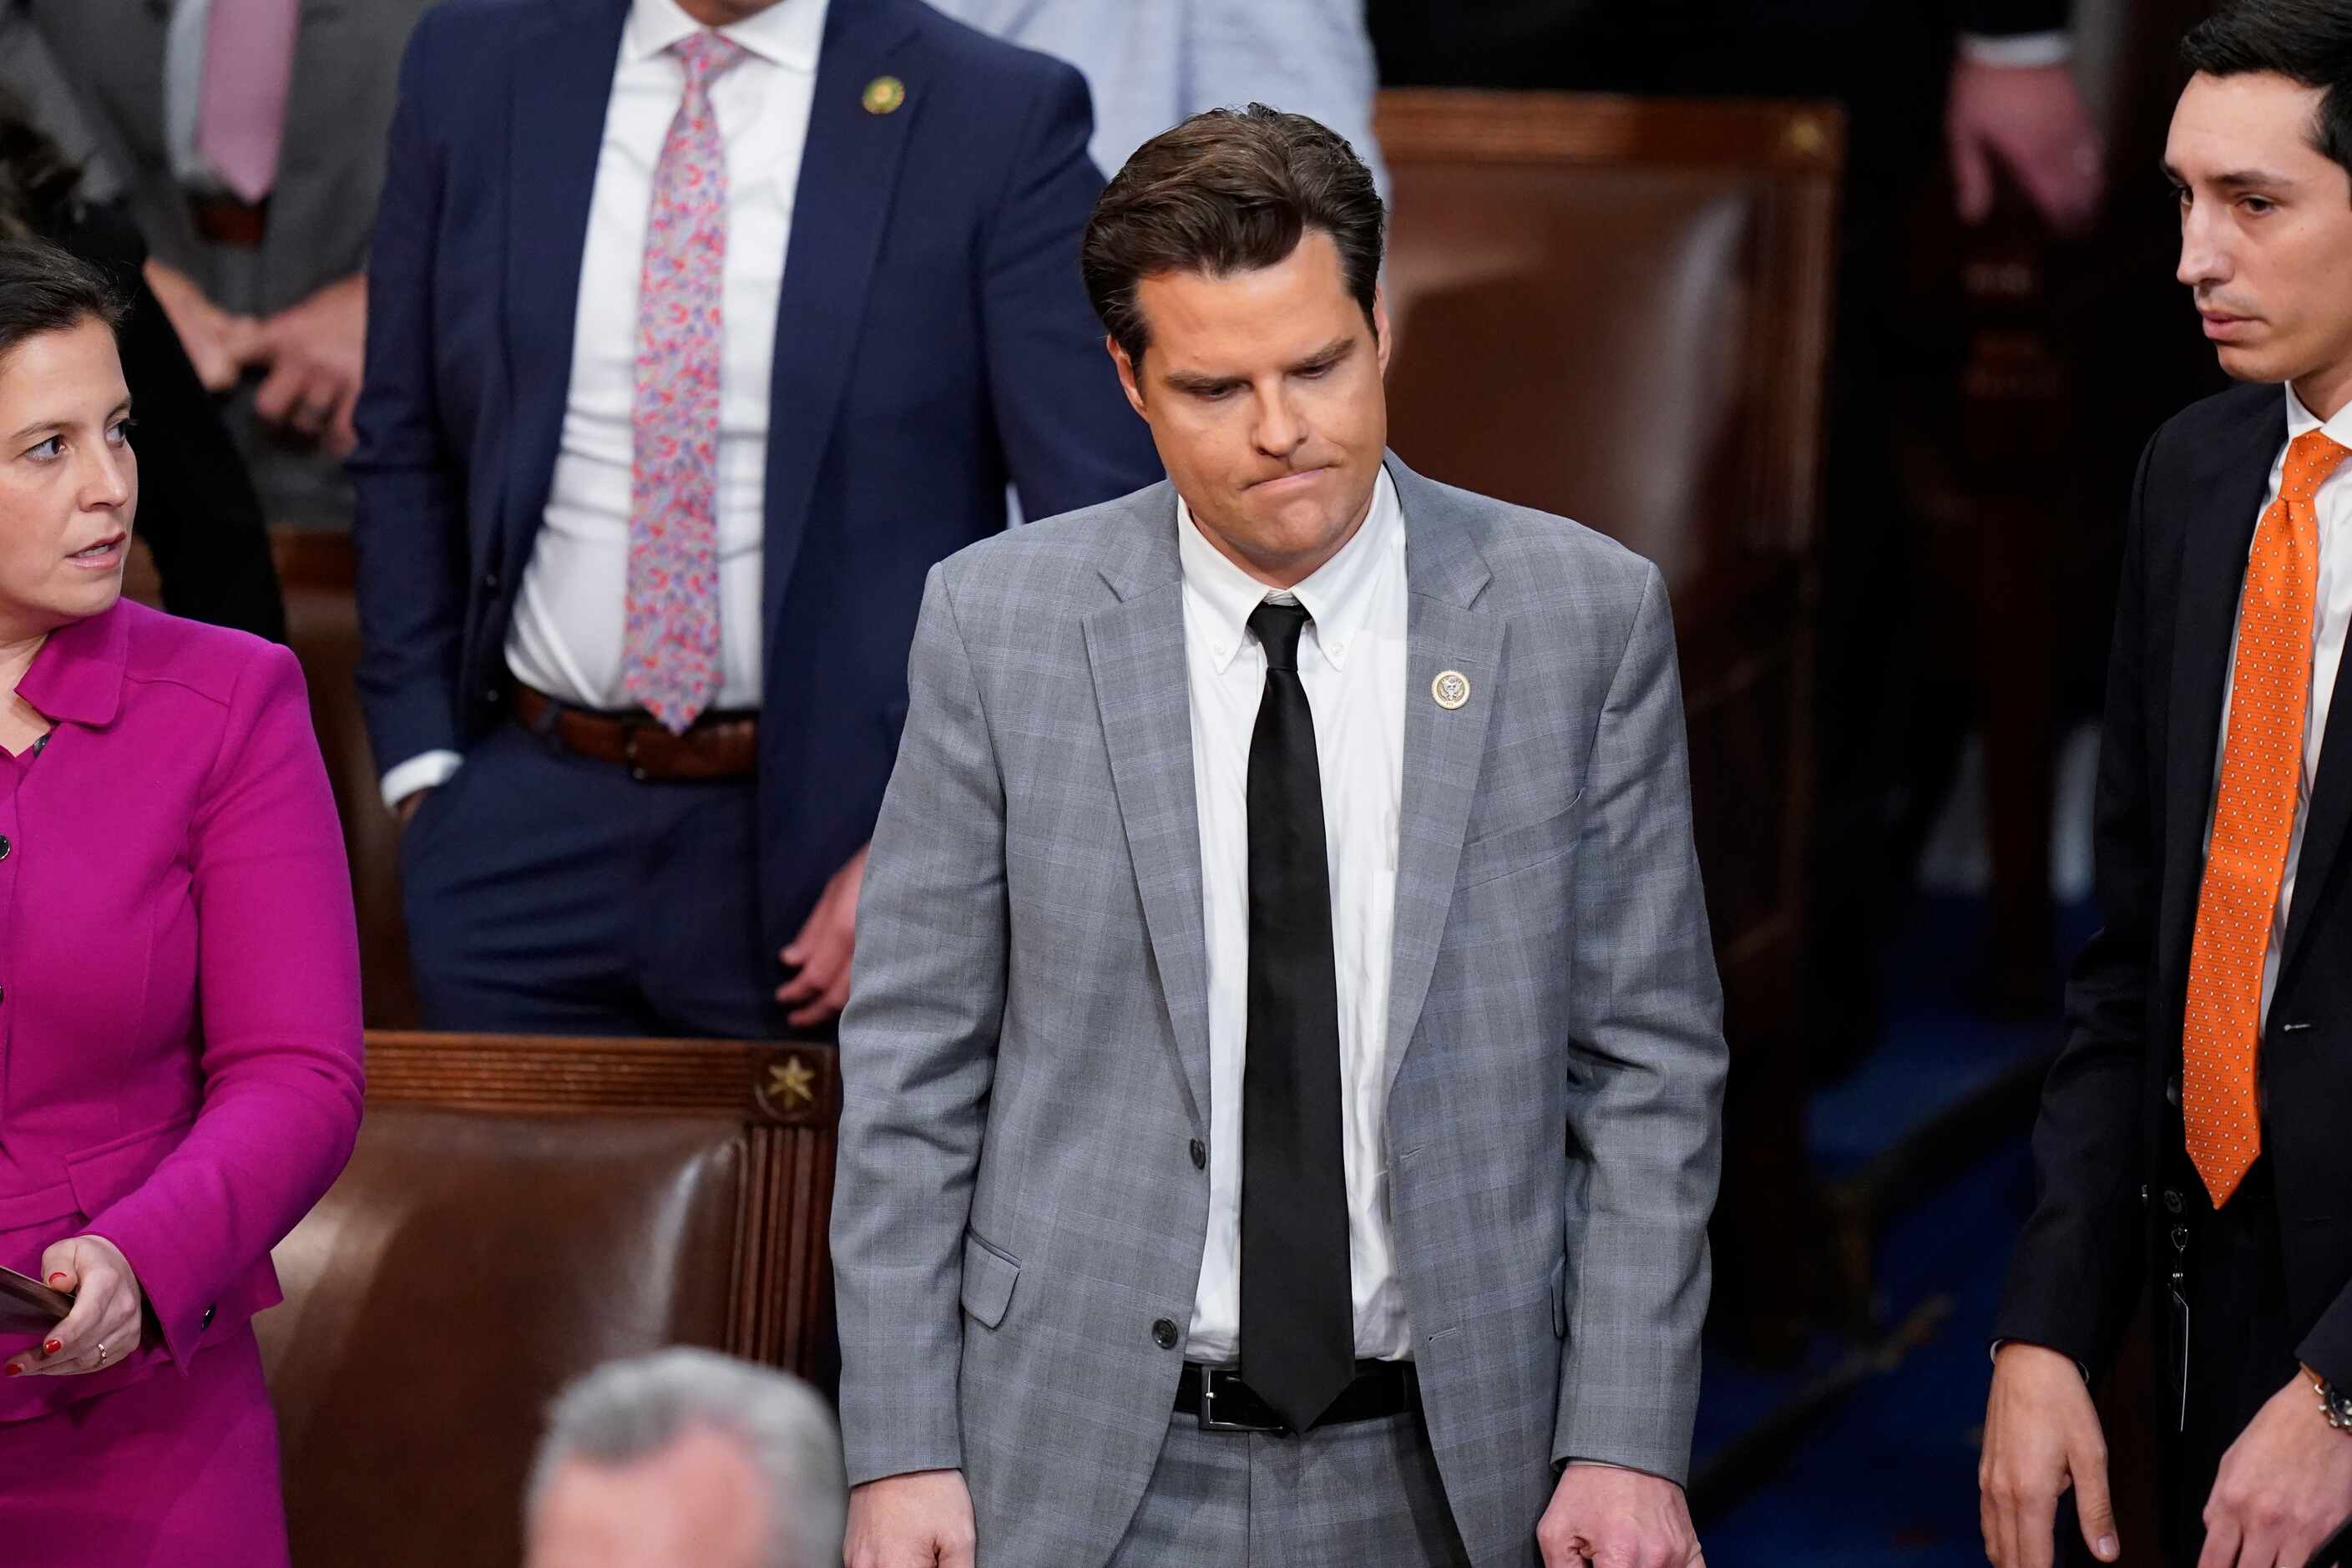 Rep. Matt Gaetz, R-Fla., waits for the evening session in the House chamber to begin as the...